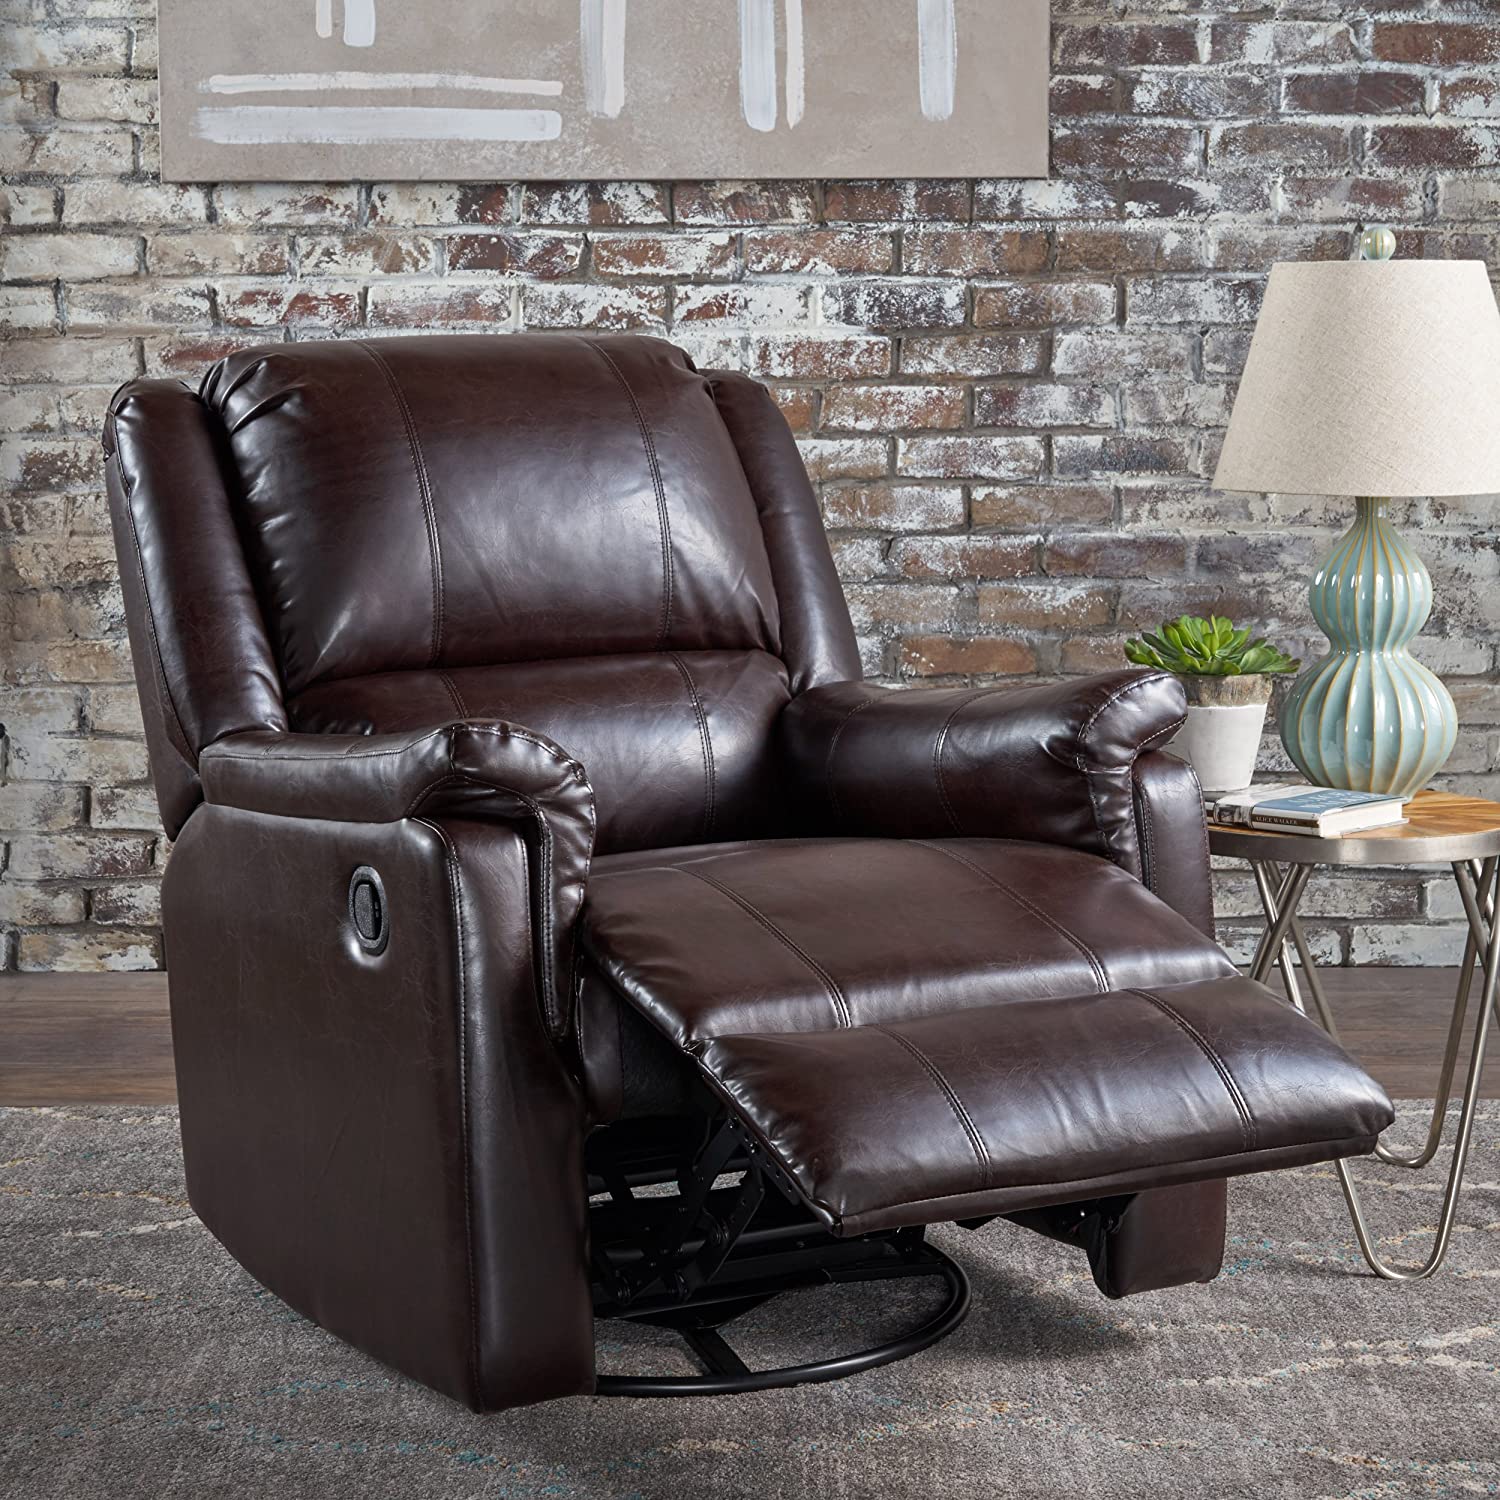 Christopher Knight Home Jennette Tufted Leather Swivel Gliding Recliner